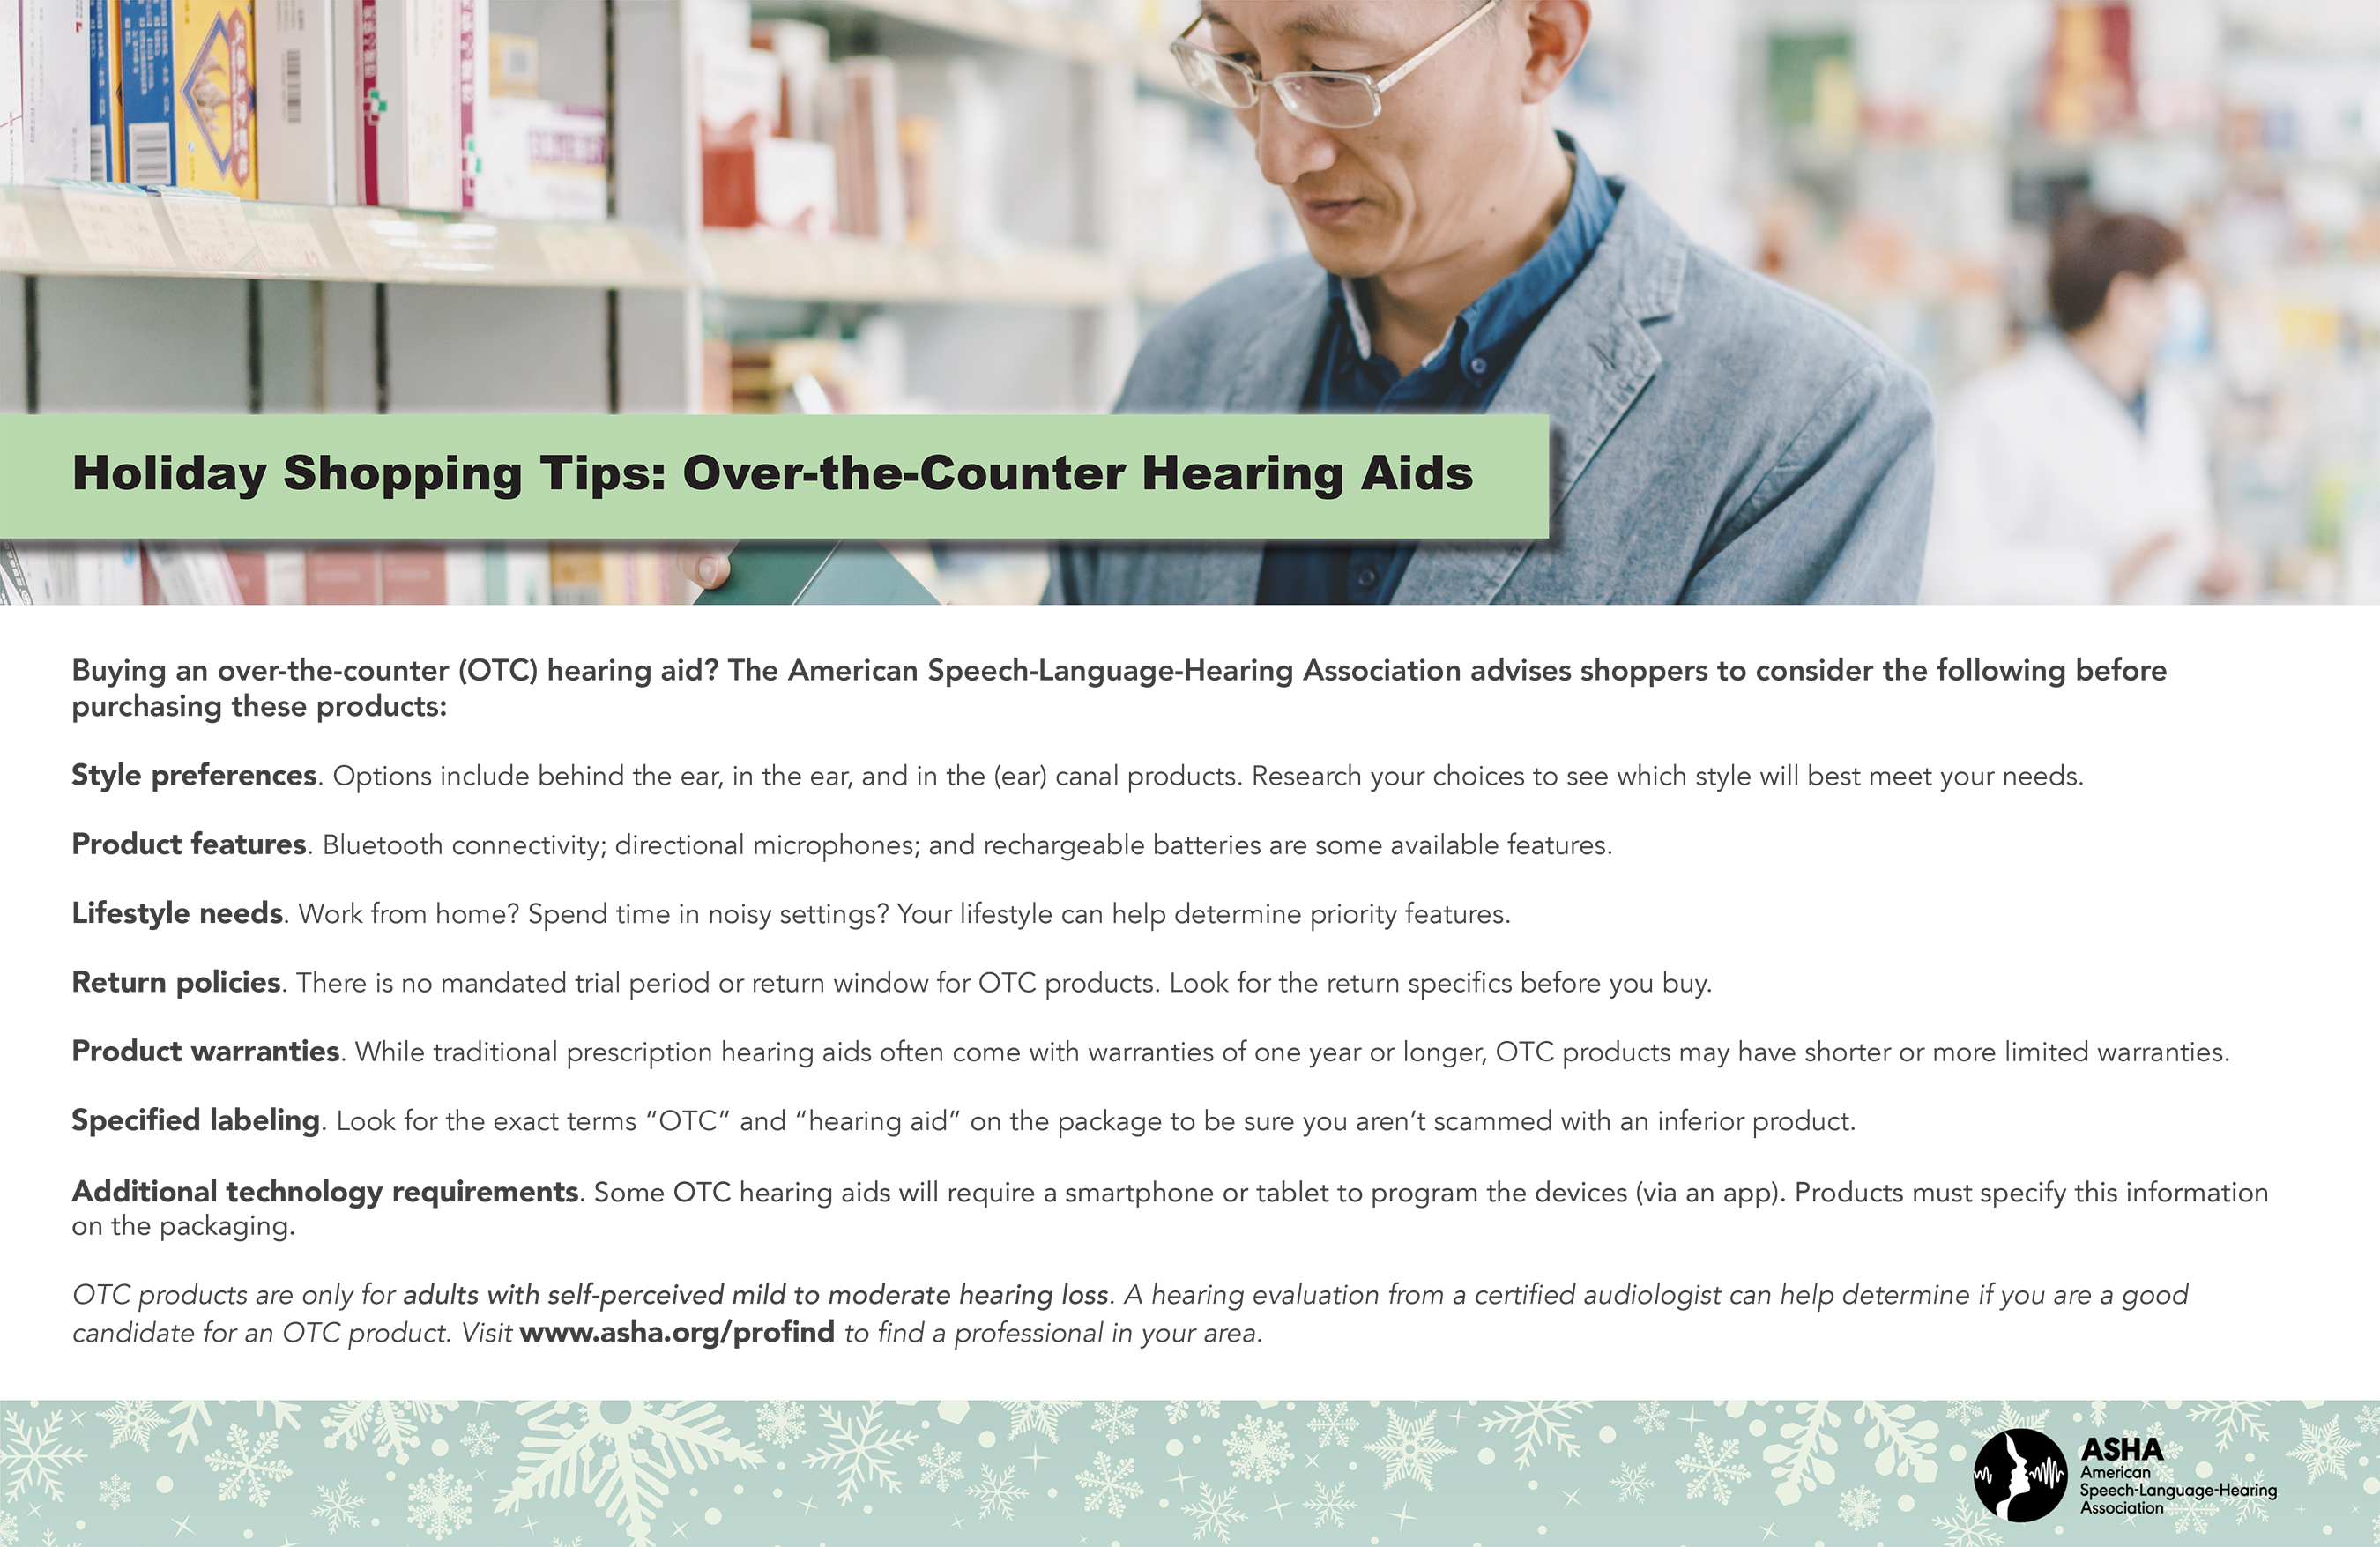 Holiday Shopping Tips: Over-the-Counter Hearing Aids